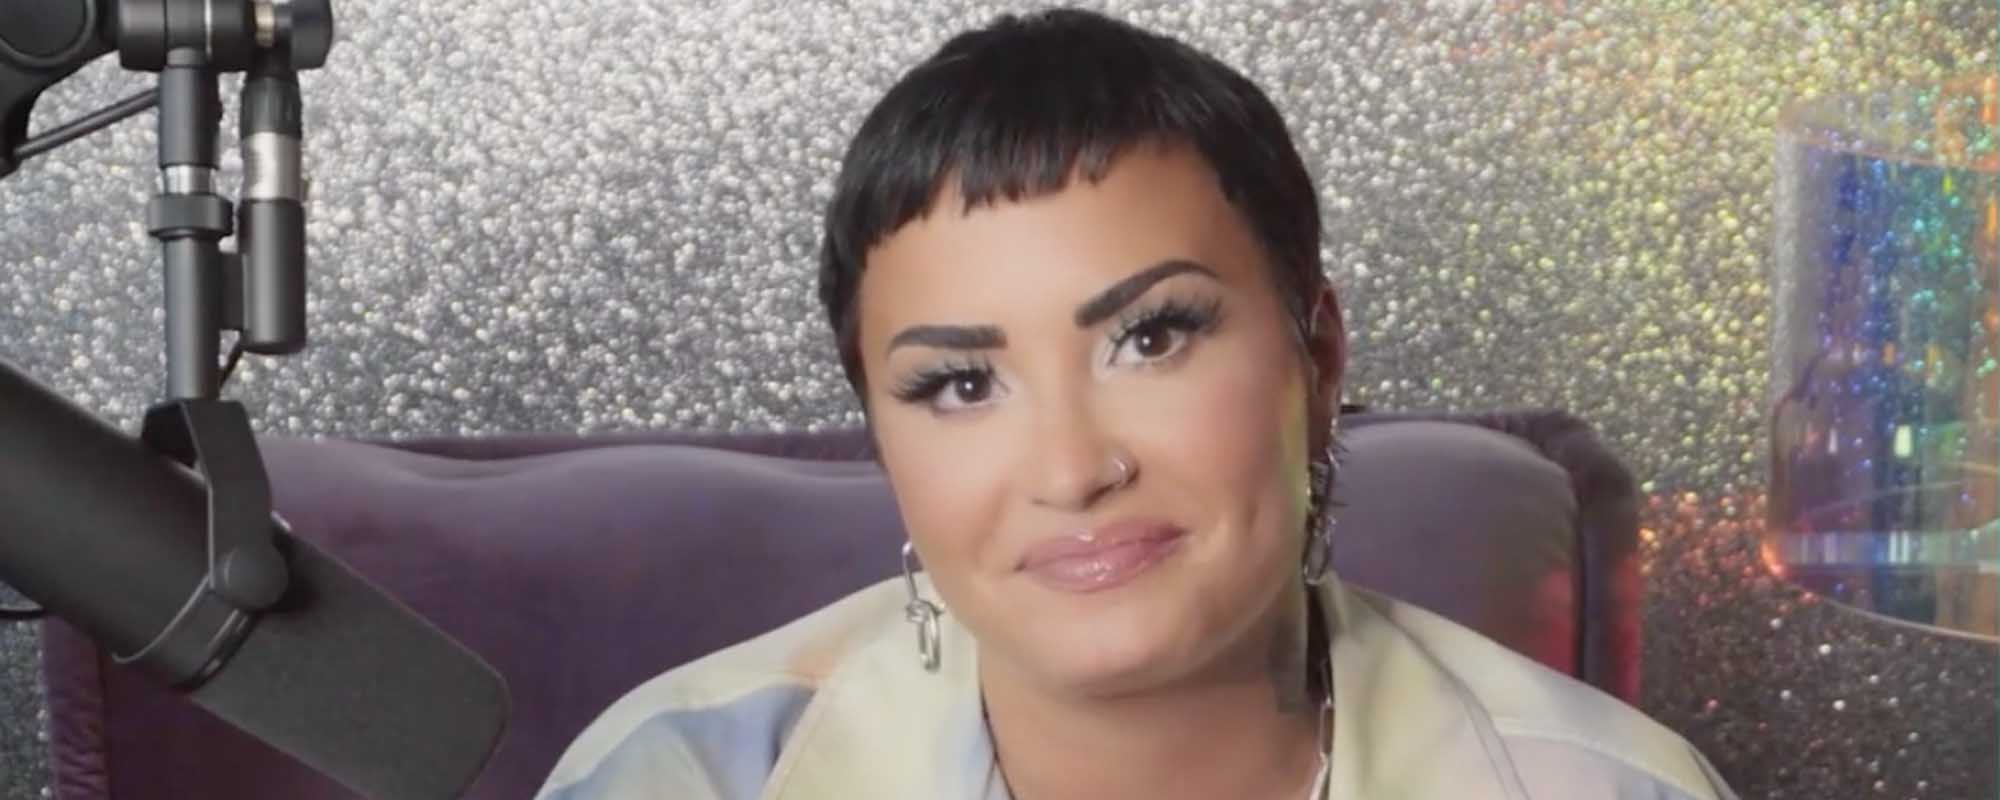 Demi Lovato Reveals They are Nonbinary, Changes Pronouns to They/Them